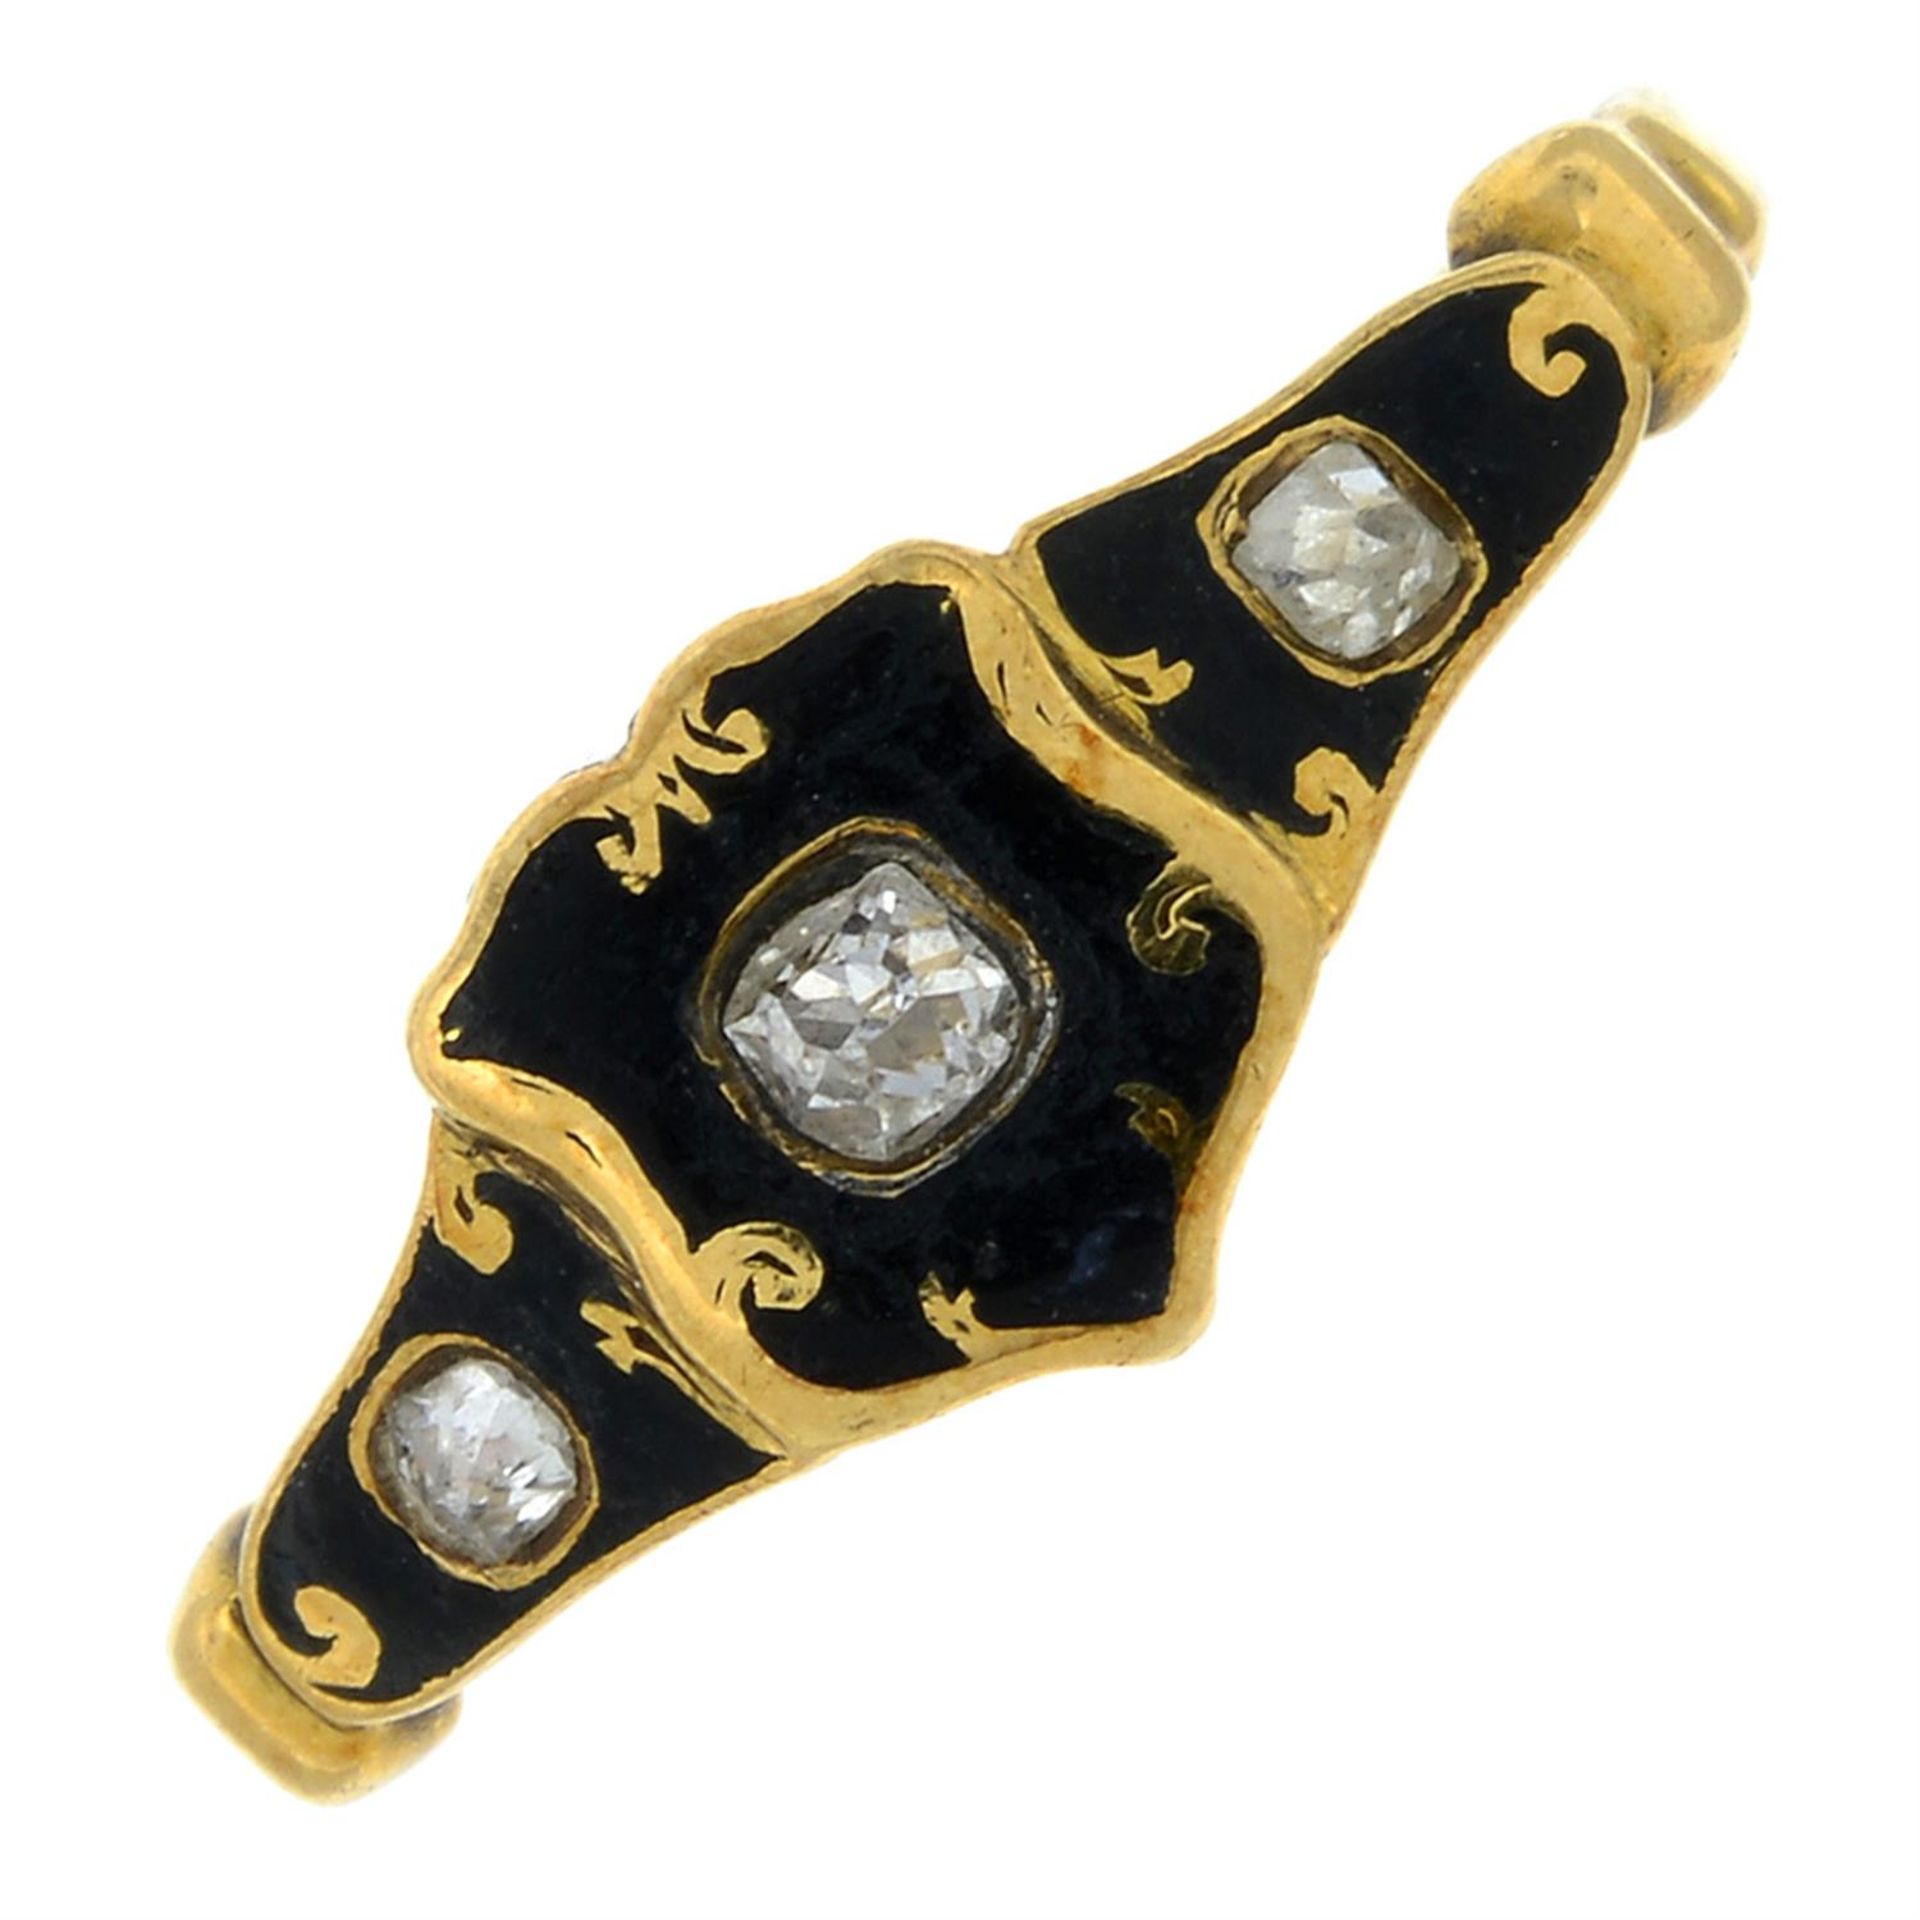 A 19th century18ct gold old-cut diamond and black enamel mourning ring with internal locket.